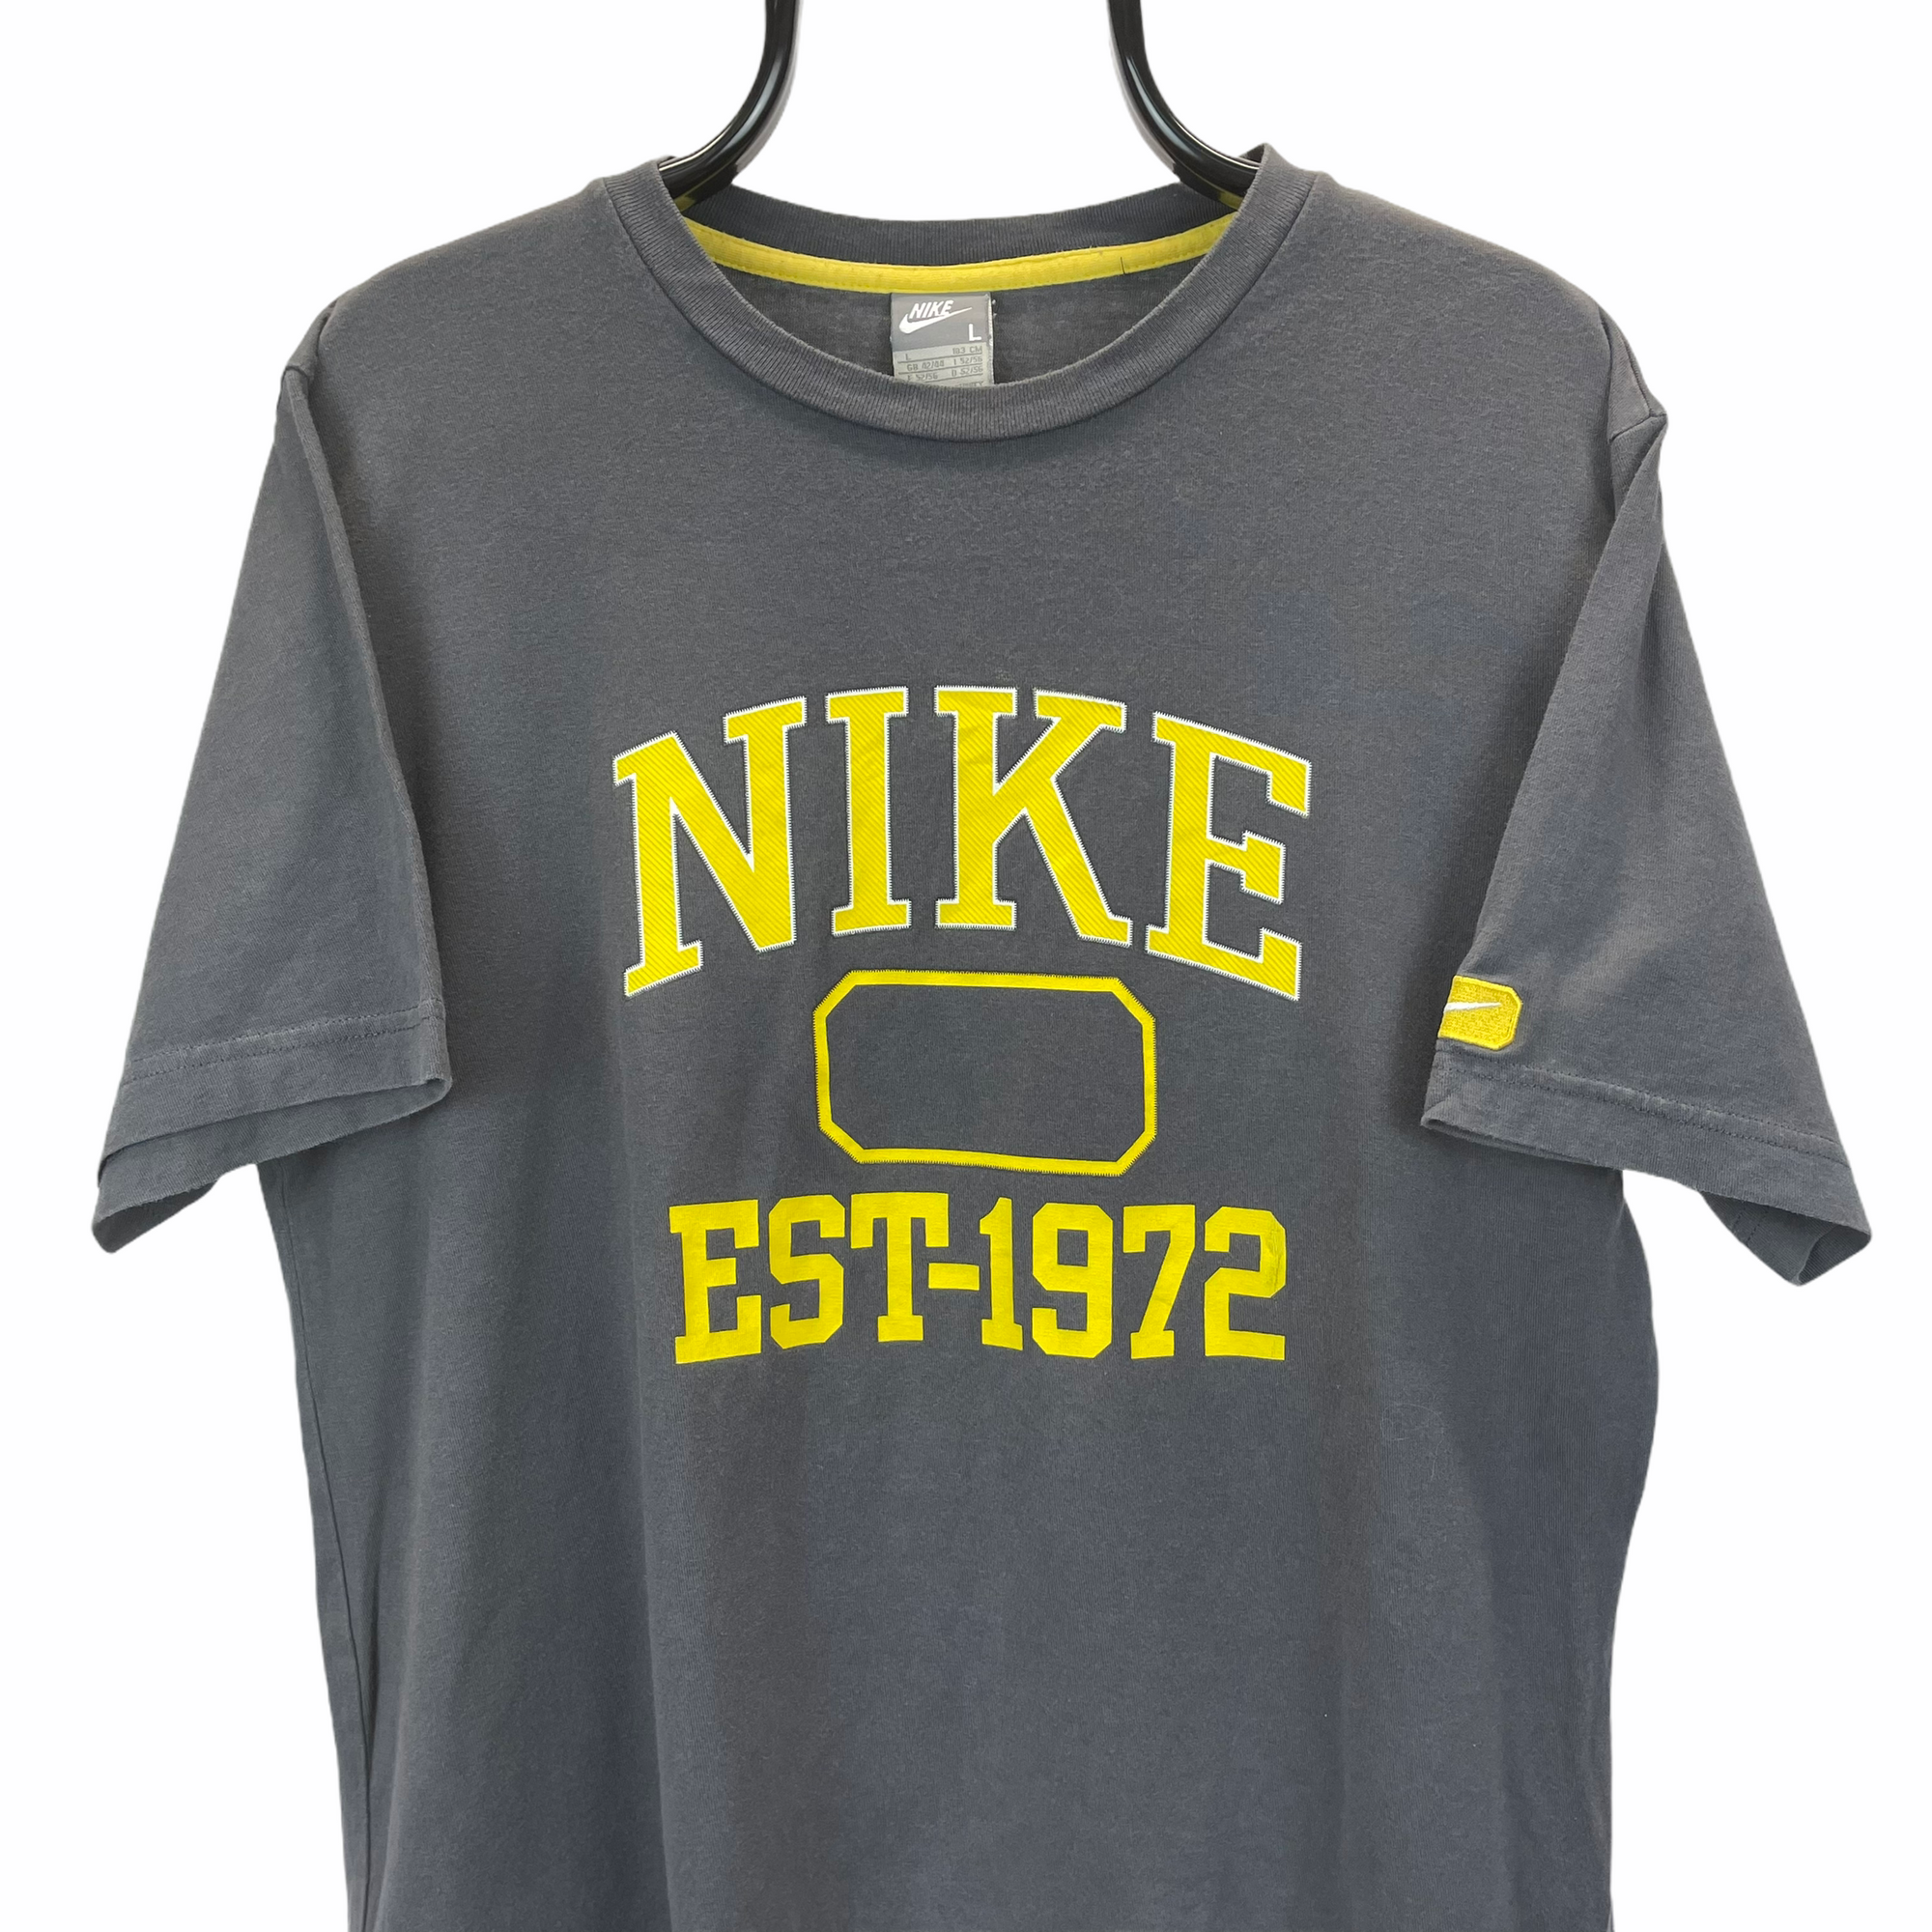 VINTAGE NIKE SPELLOUT TEE IN DEEP GREY & YELLOW - MEN'S LARGE/WOMEN'S XL